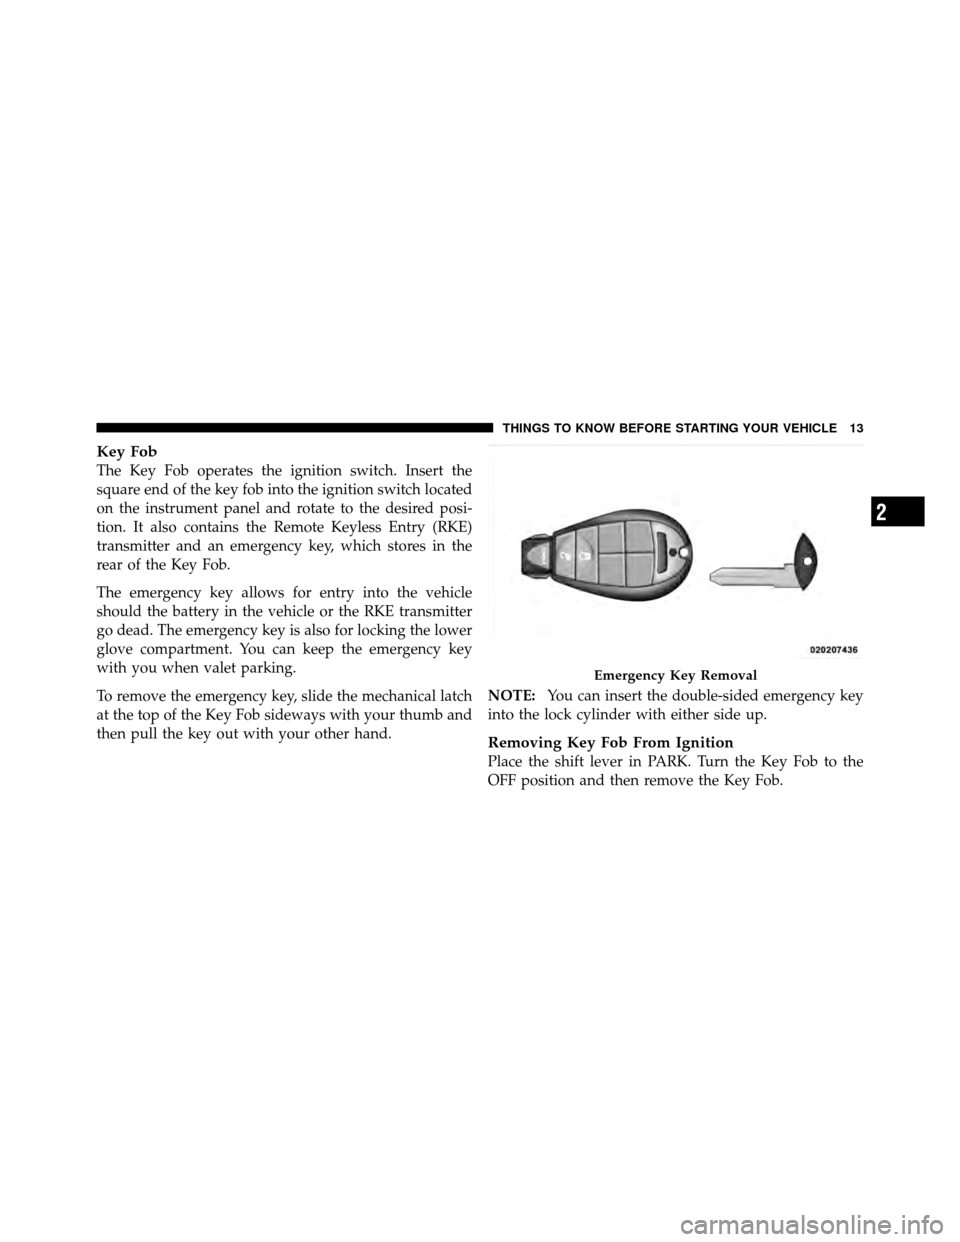 CHRYSLER TOWN AND COUNTRY 2012 5.G User Guide Key Fob
The Key Fob operates the ignition switch. Insert the
square end of the key fob into the ignition switch located
on the instrument panel and rotate to the desired posi-
tion. It also contains t